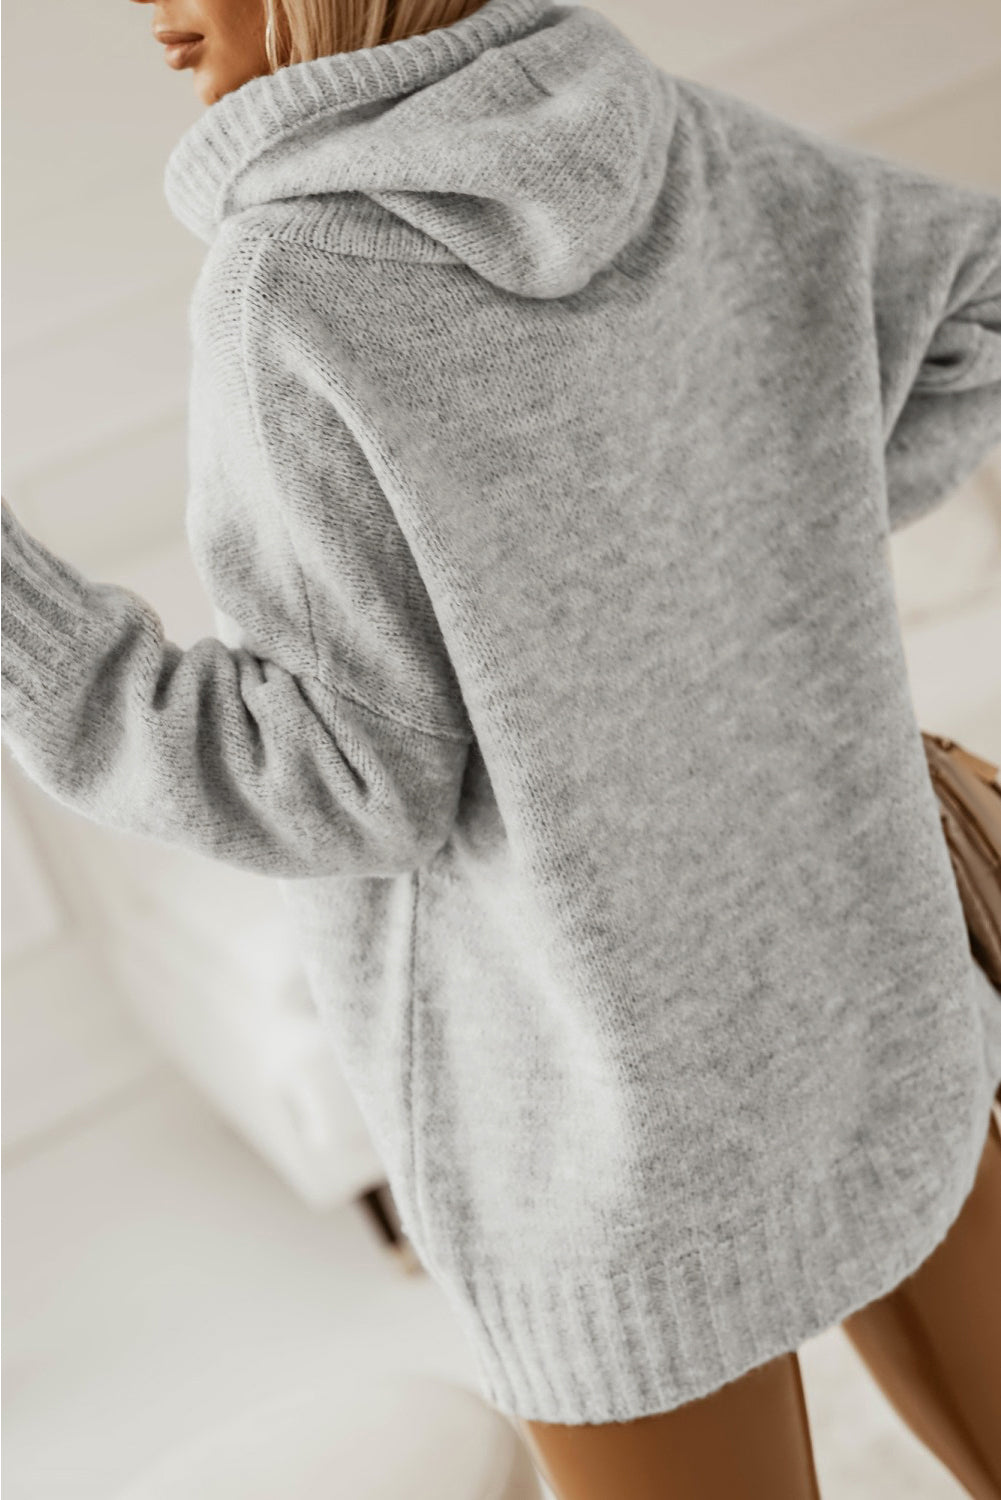 Gray Cowl Neck Drawstring Hooded Pullover Sweater